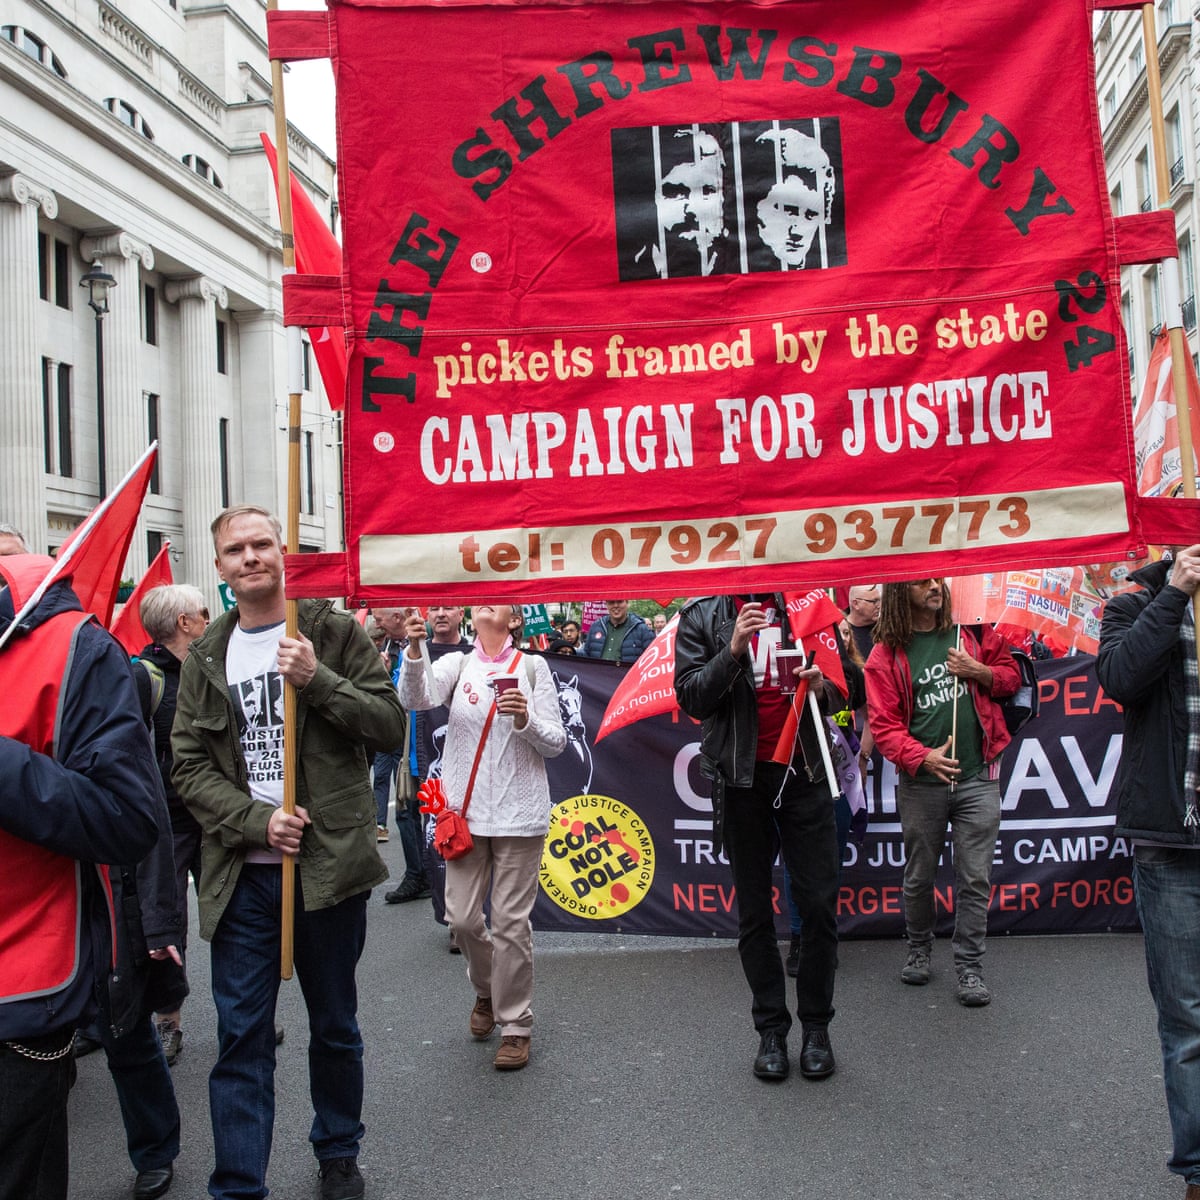 Shrewsbury 24: how industrial action led to 47-year fight for justice | UK  criminal justice | The Guardian